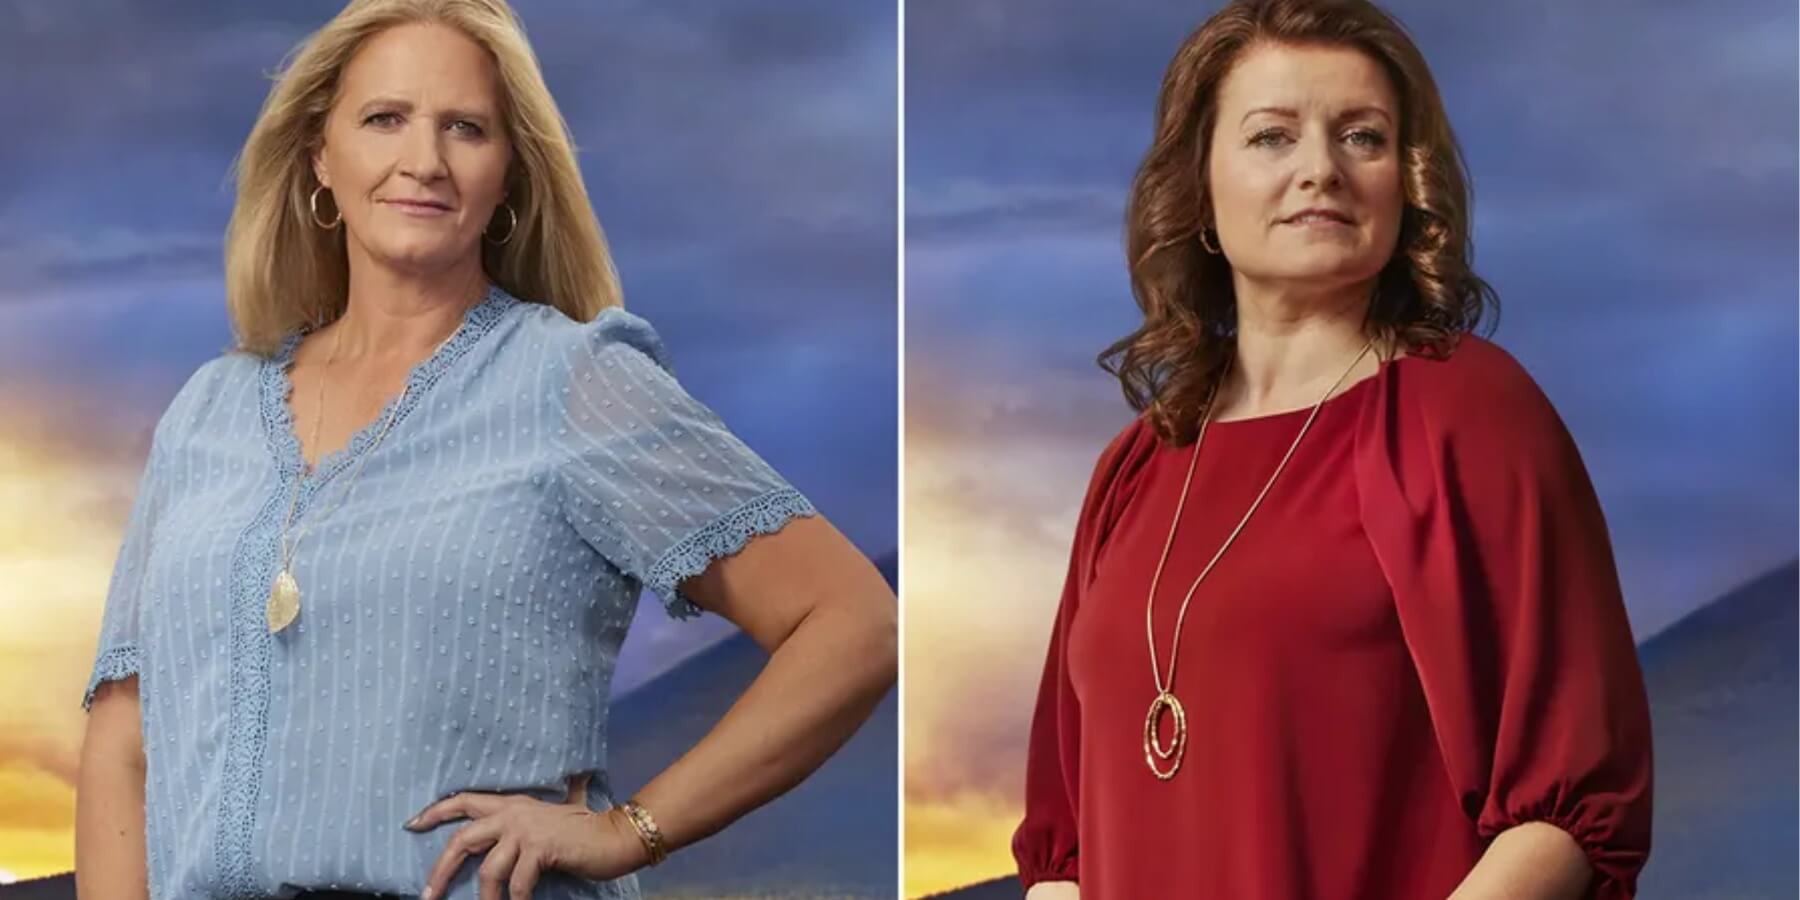 Christine Brown believes Robyn Brown meddled in her 'Sister Wives' marriages claiming she could 'speak Kody.'